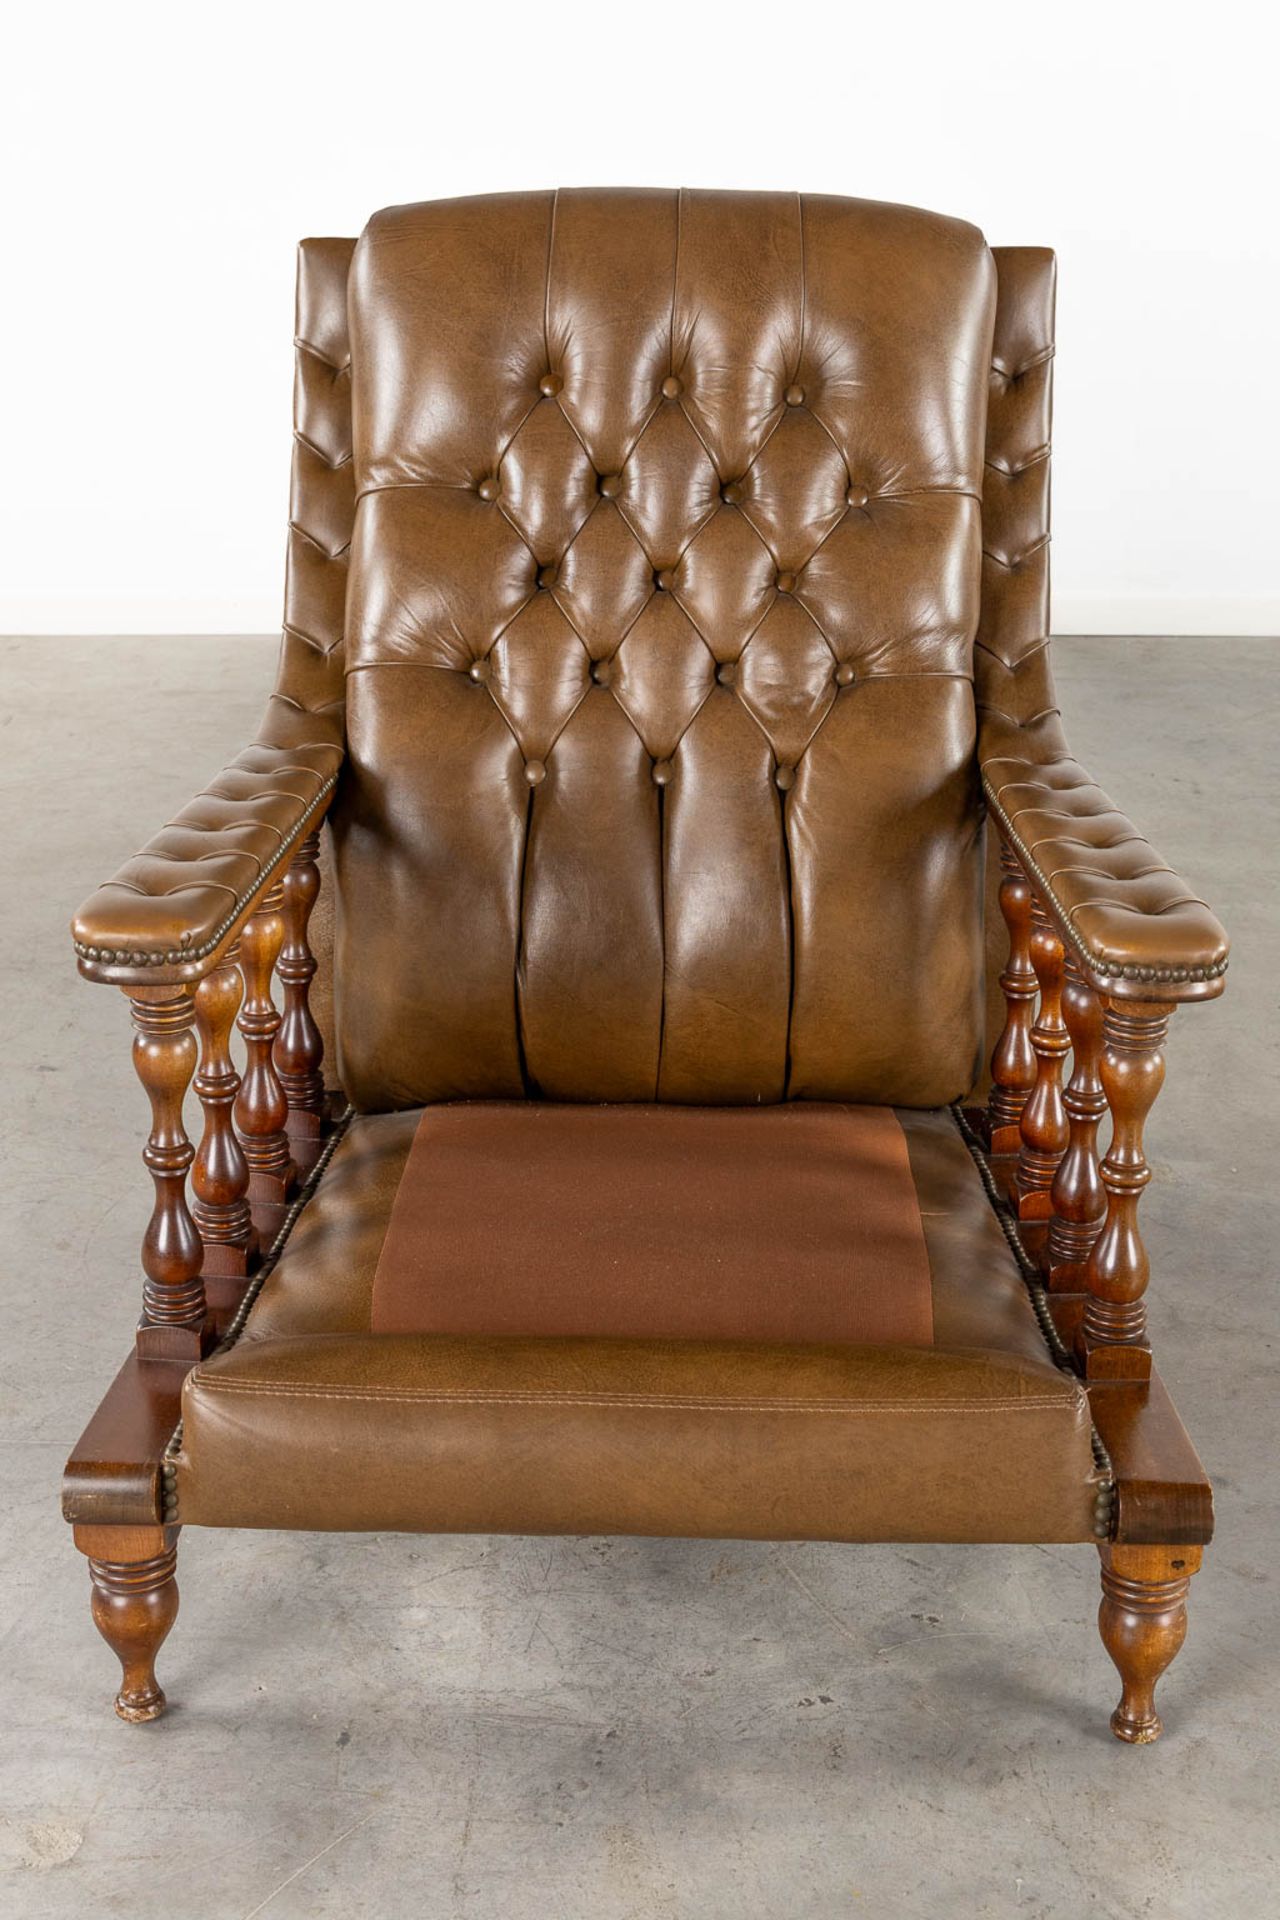 A pair of relax chairs, leather and wood in Chesterfield style. (L:83 x W:74 x H:95 cm) - Bild 8 aus 11